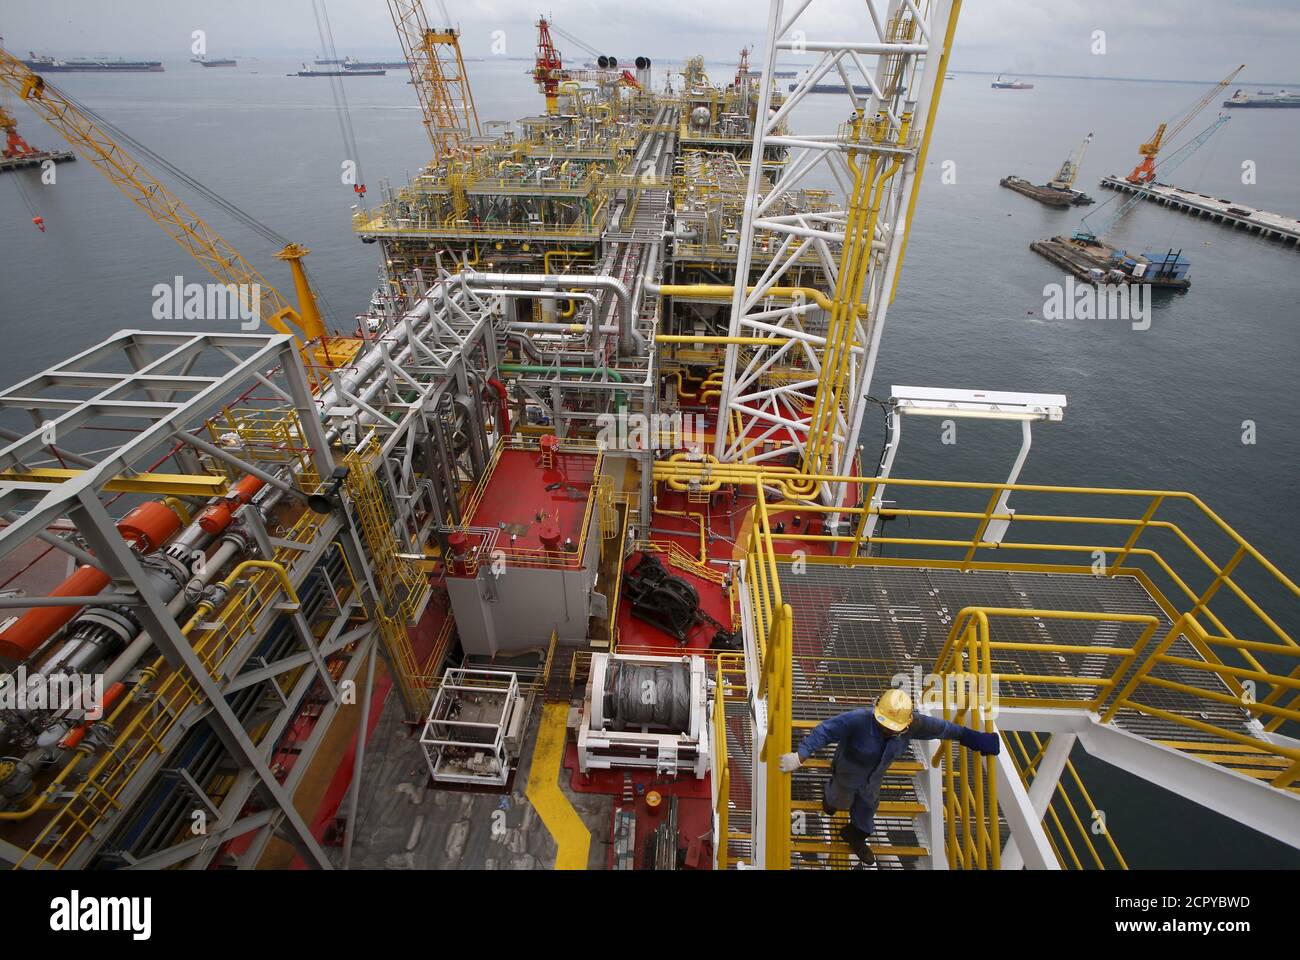 A view of Tullow Oil's newly completed Floating Production, Storage and Offloading vessel (FPSO) Prof. John Evans Atta Mills at Sembcorp Marine's Jurong Shipyard in Singapore January 20, 2016. Amid one of the deepest oil price crashes in history, Britain's Tullow Oil is sending one of the world's biggest floating deep-water oil production platforms to West Africa to pump crude for at least 20 years. Picture taken January 20, 2016.   REUTERS/Edgar Su Stock Photo